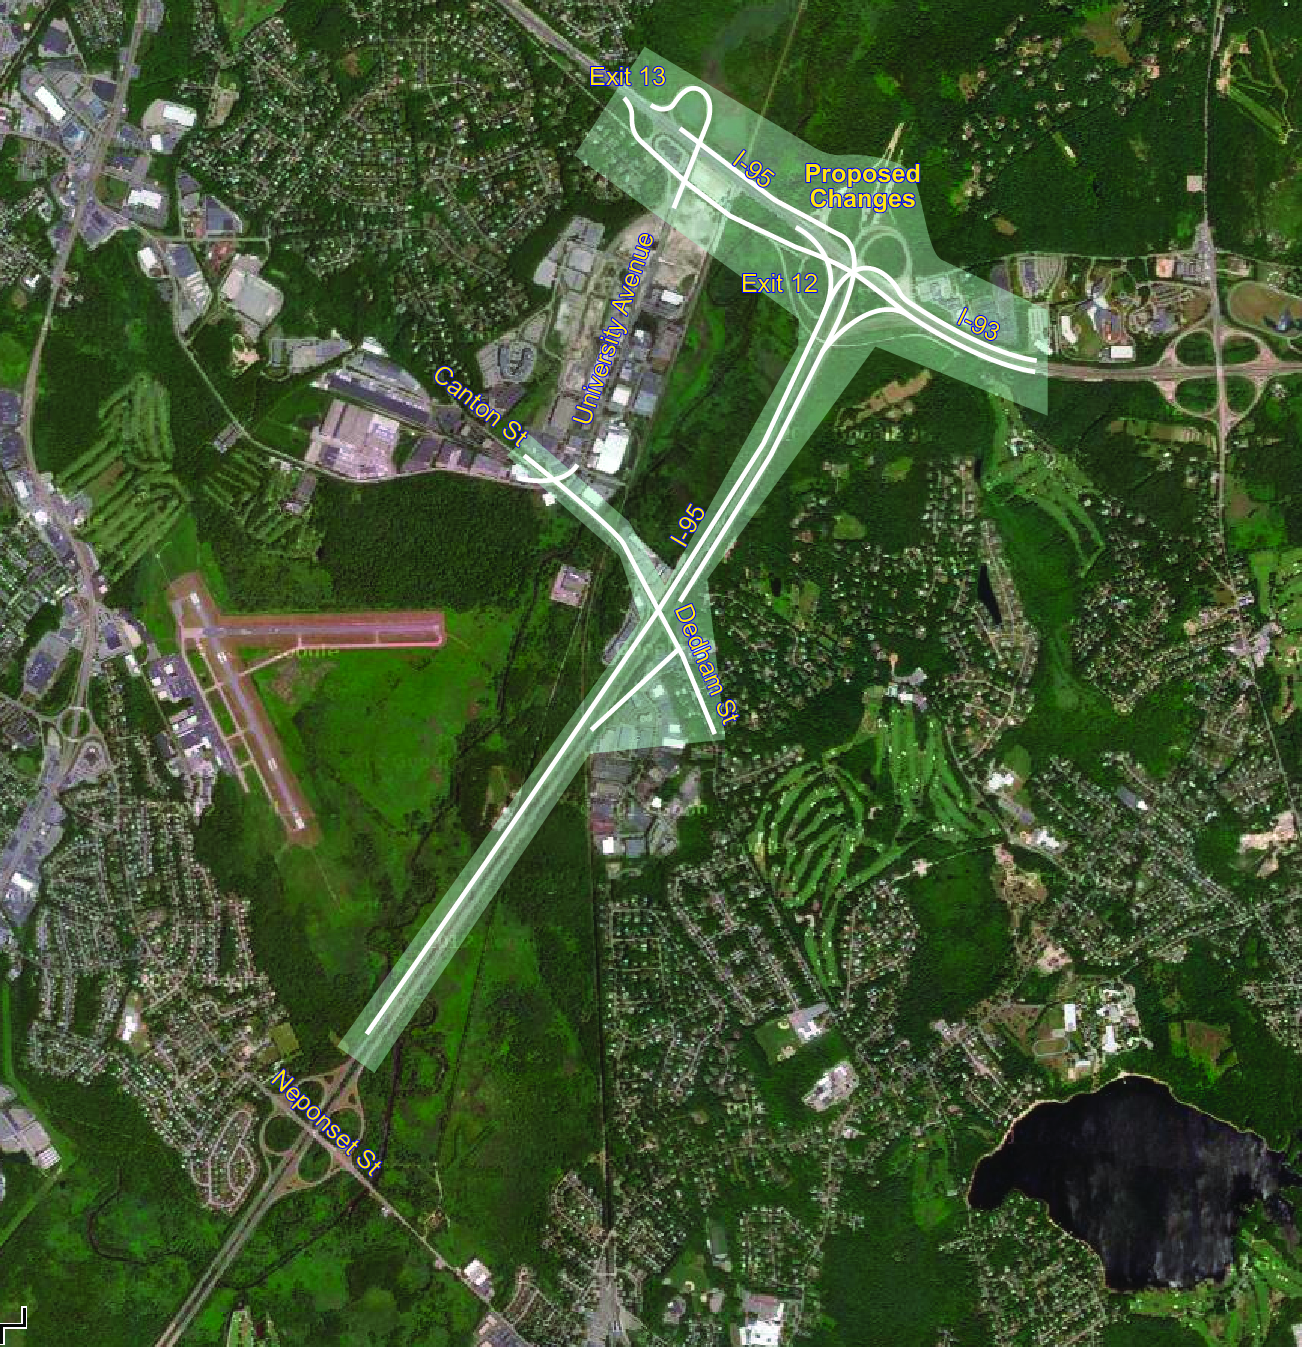 Map 1 shows the boundaries of the project area with the proposed improvements to the Interstate 95/Interstate-93 Interchange.